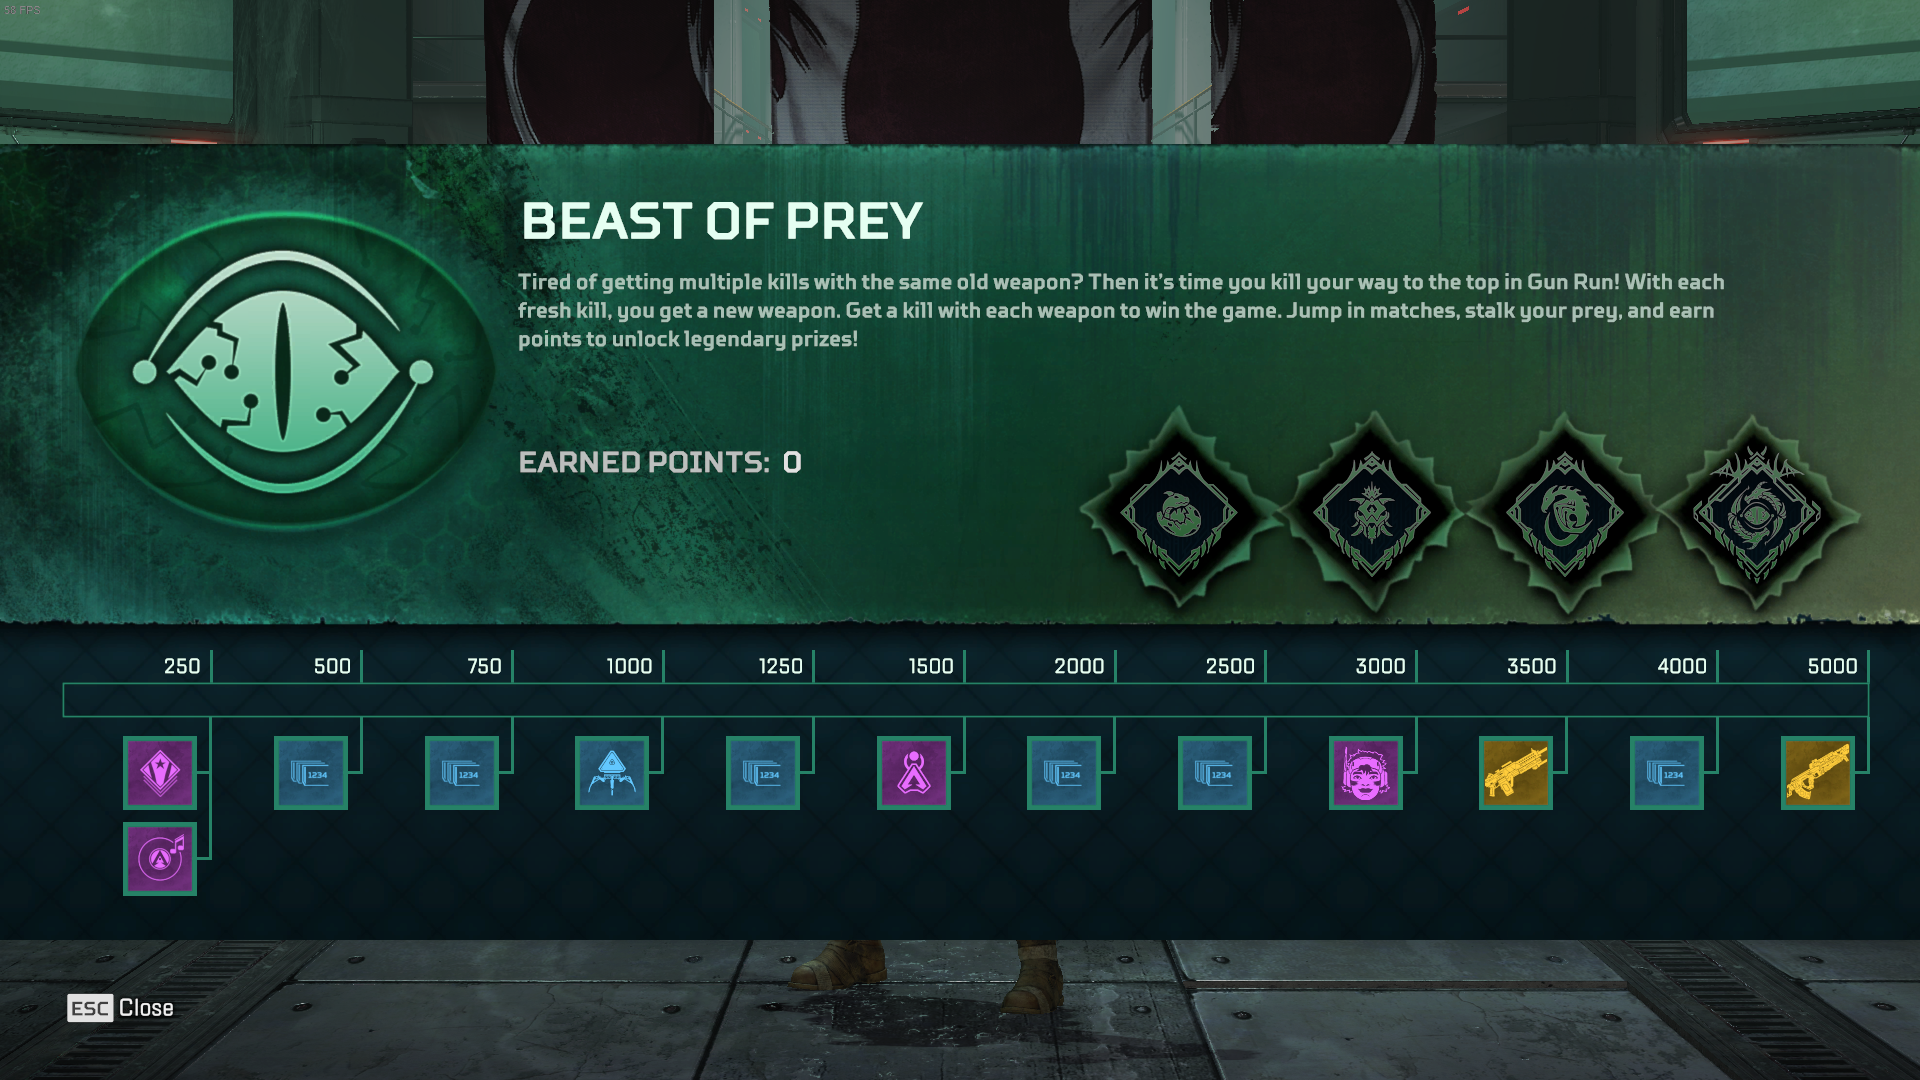 Apex Legends: Beast of Prey Challenges and Rewards Guide